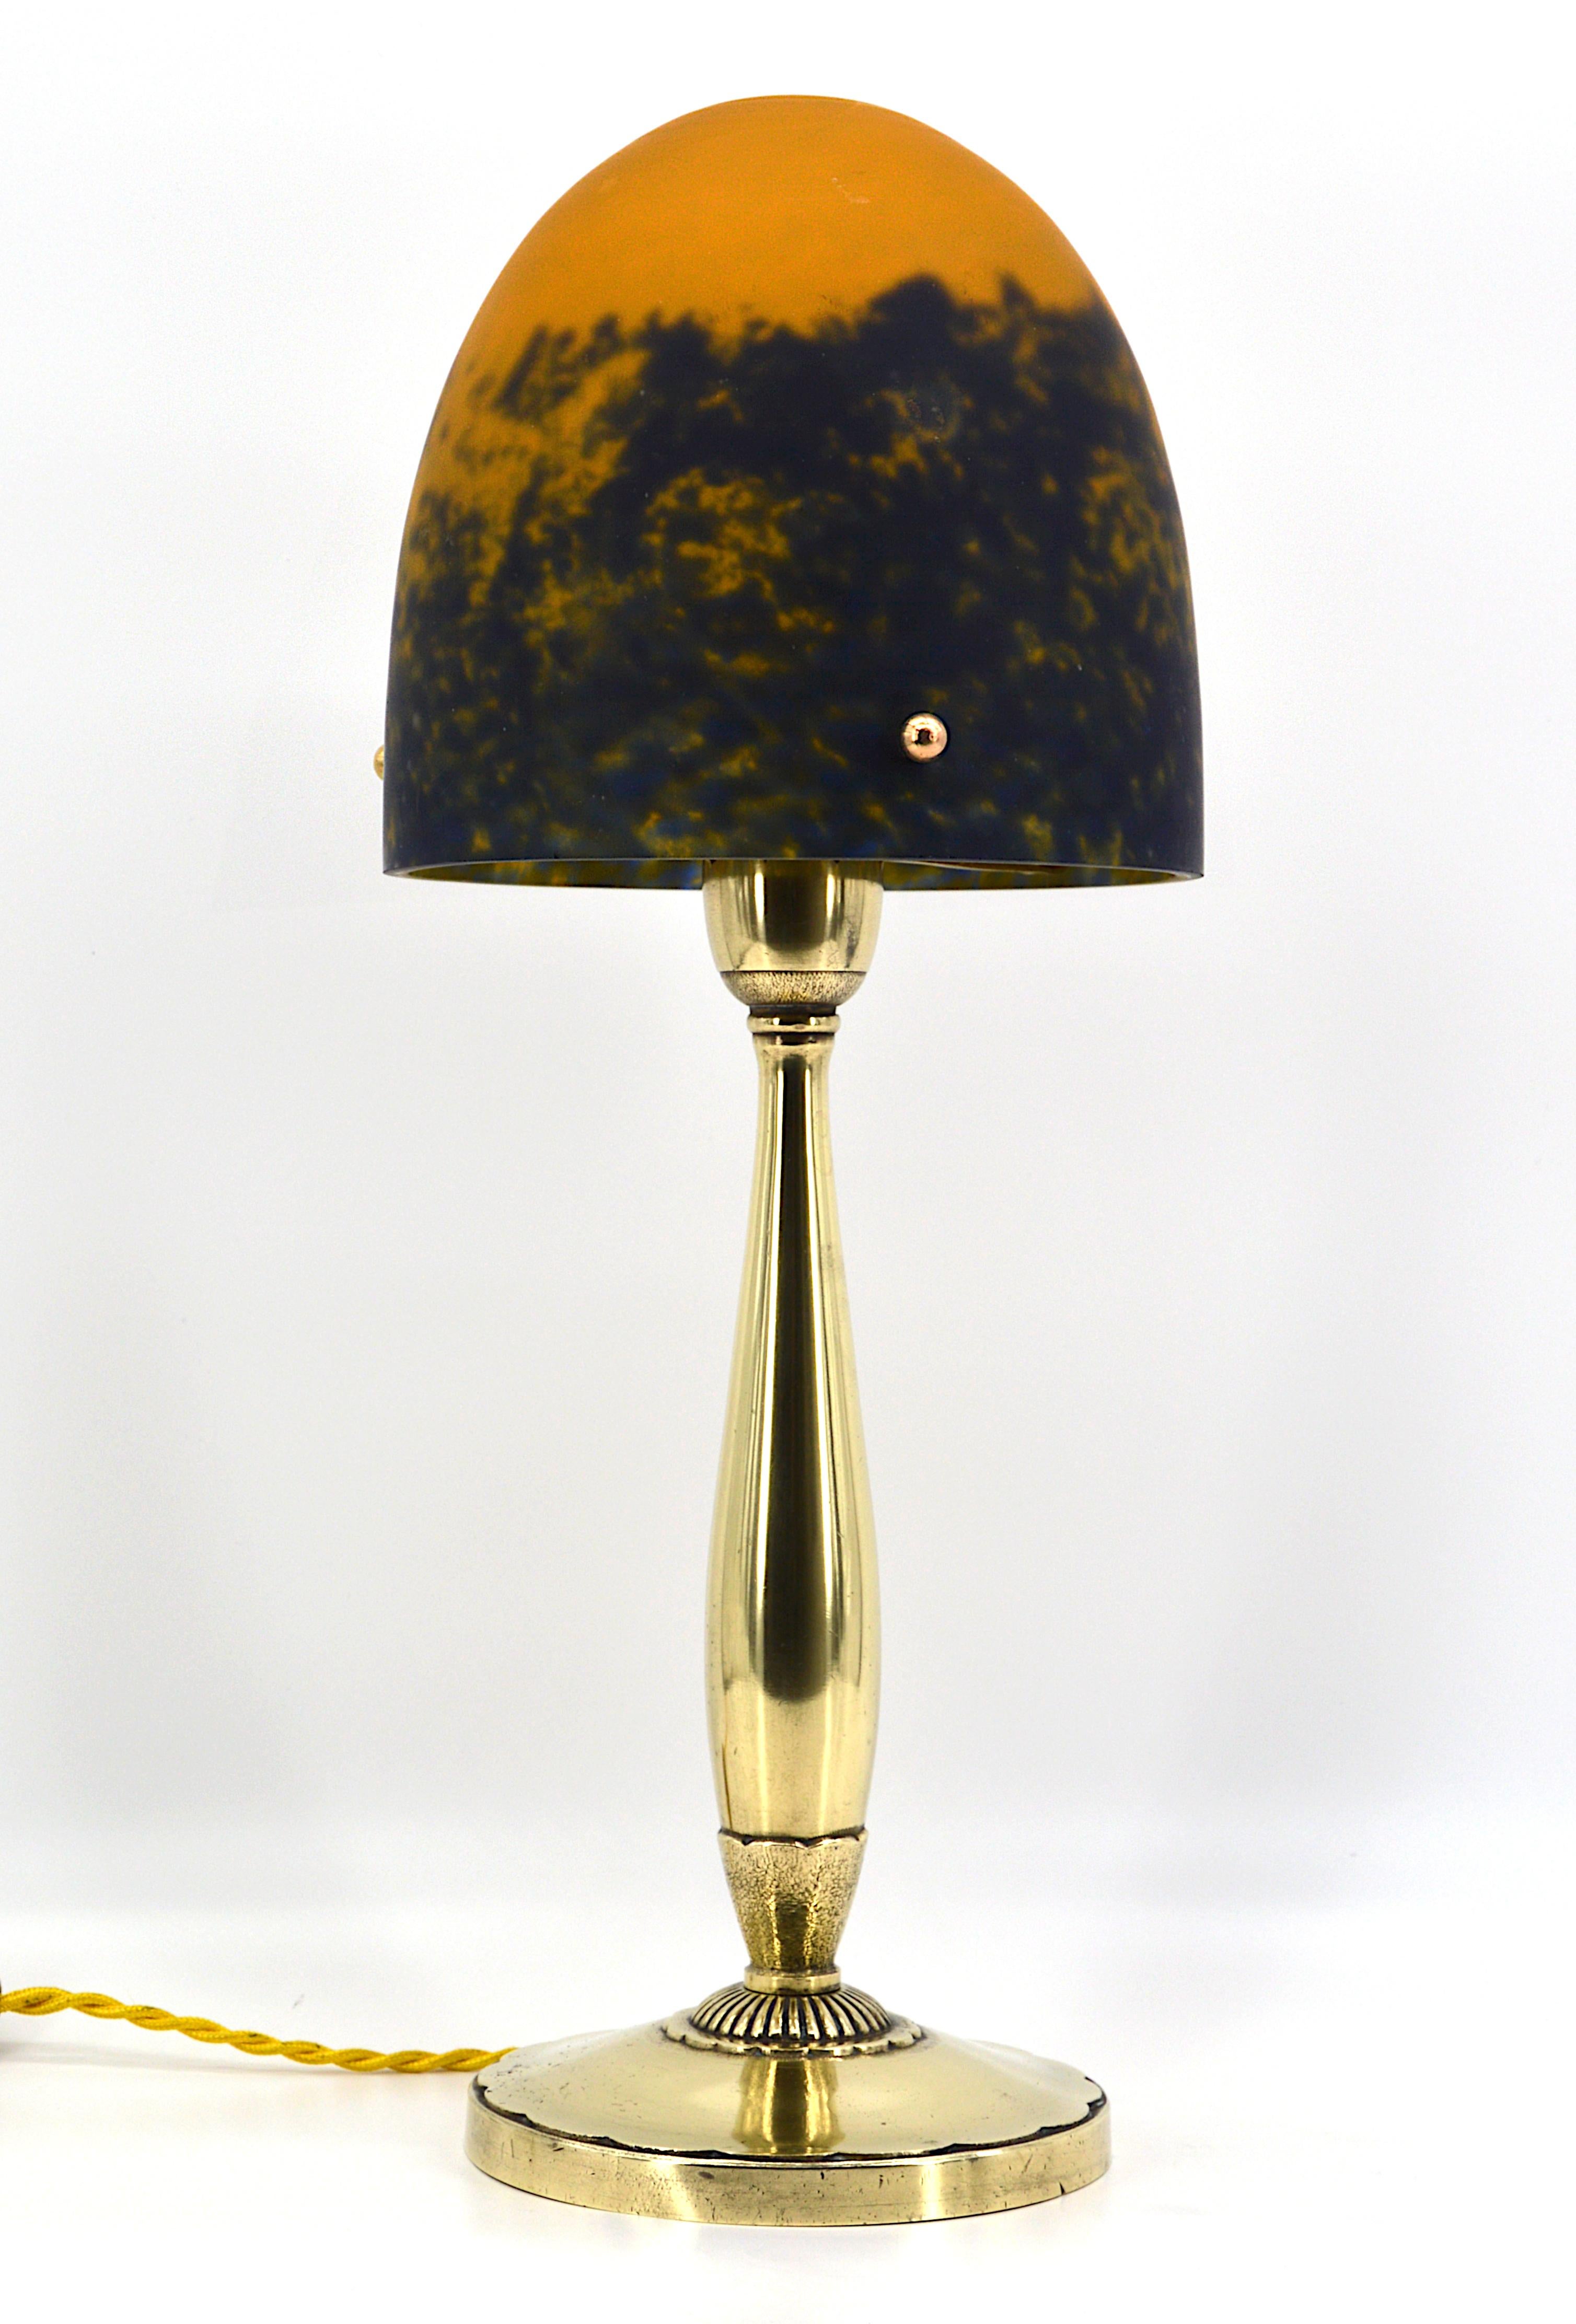 French Art Deco table lamp by DAUM (Croismare), France, 1920s. Blown double glass shade on its solid bronze base. Colors: dark blue and orange. Measures: Height 17.4